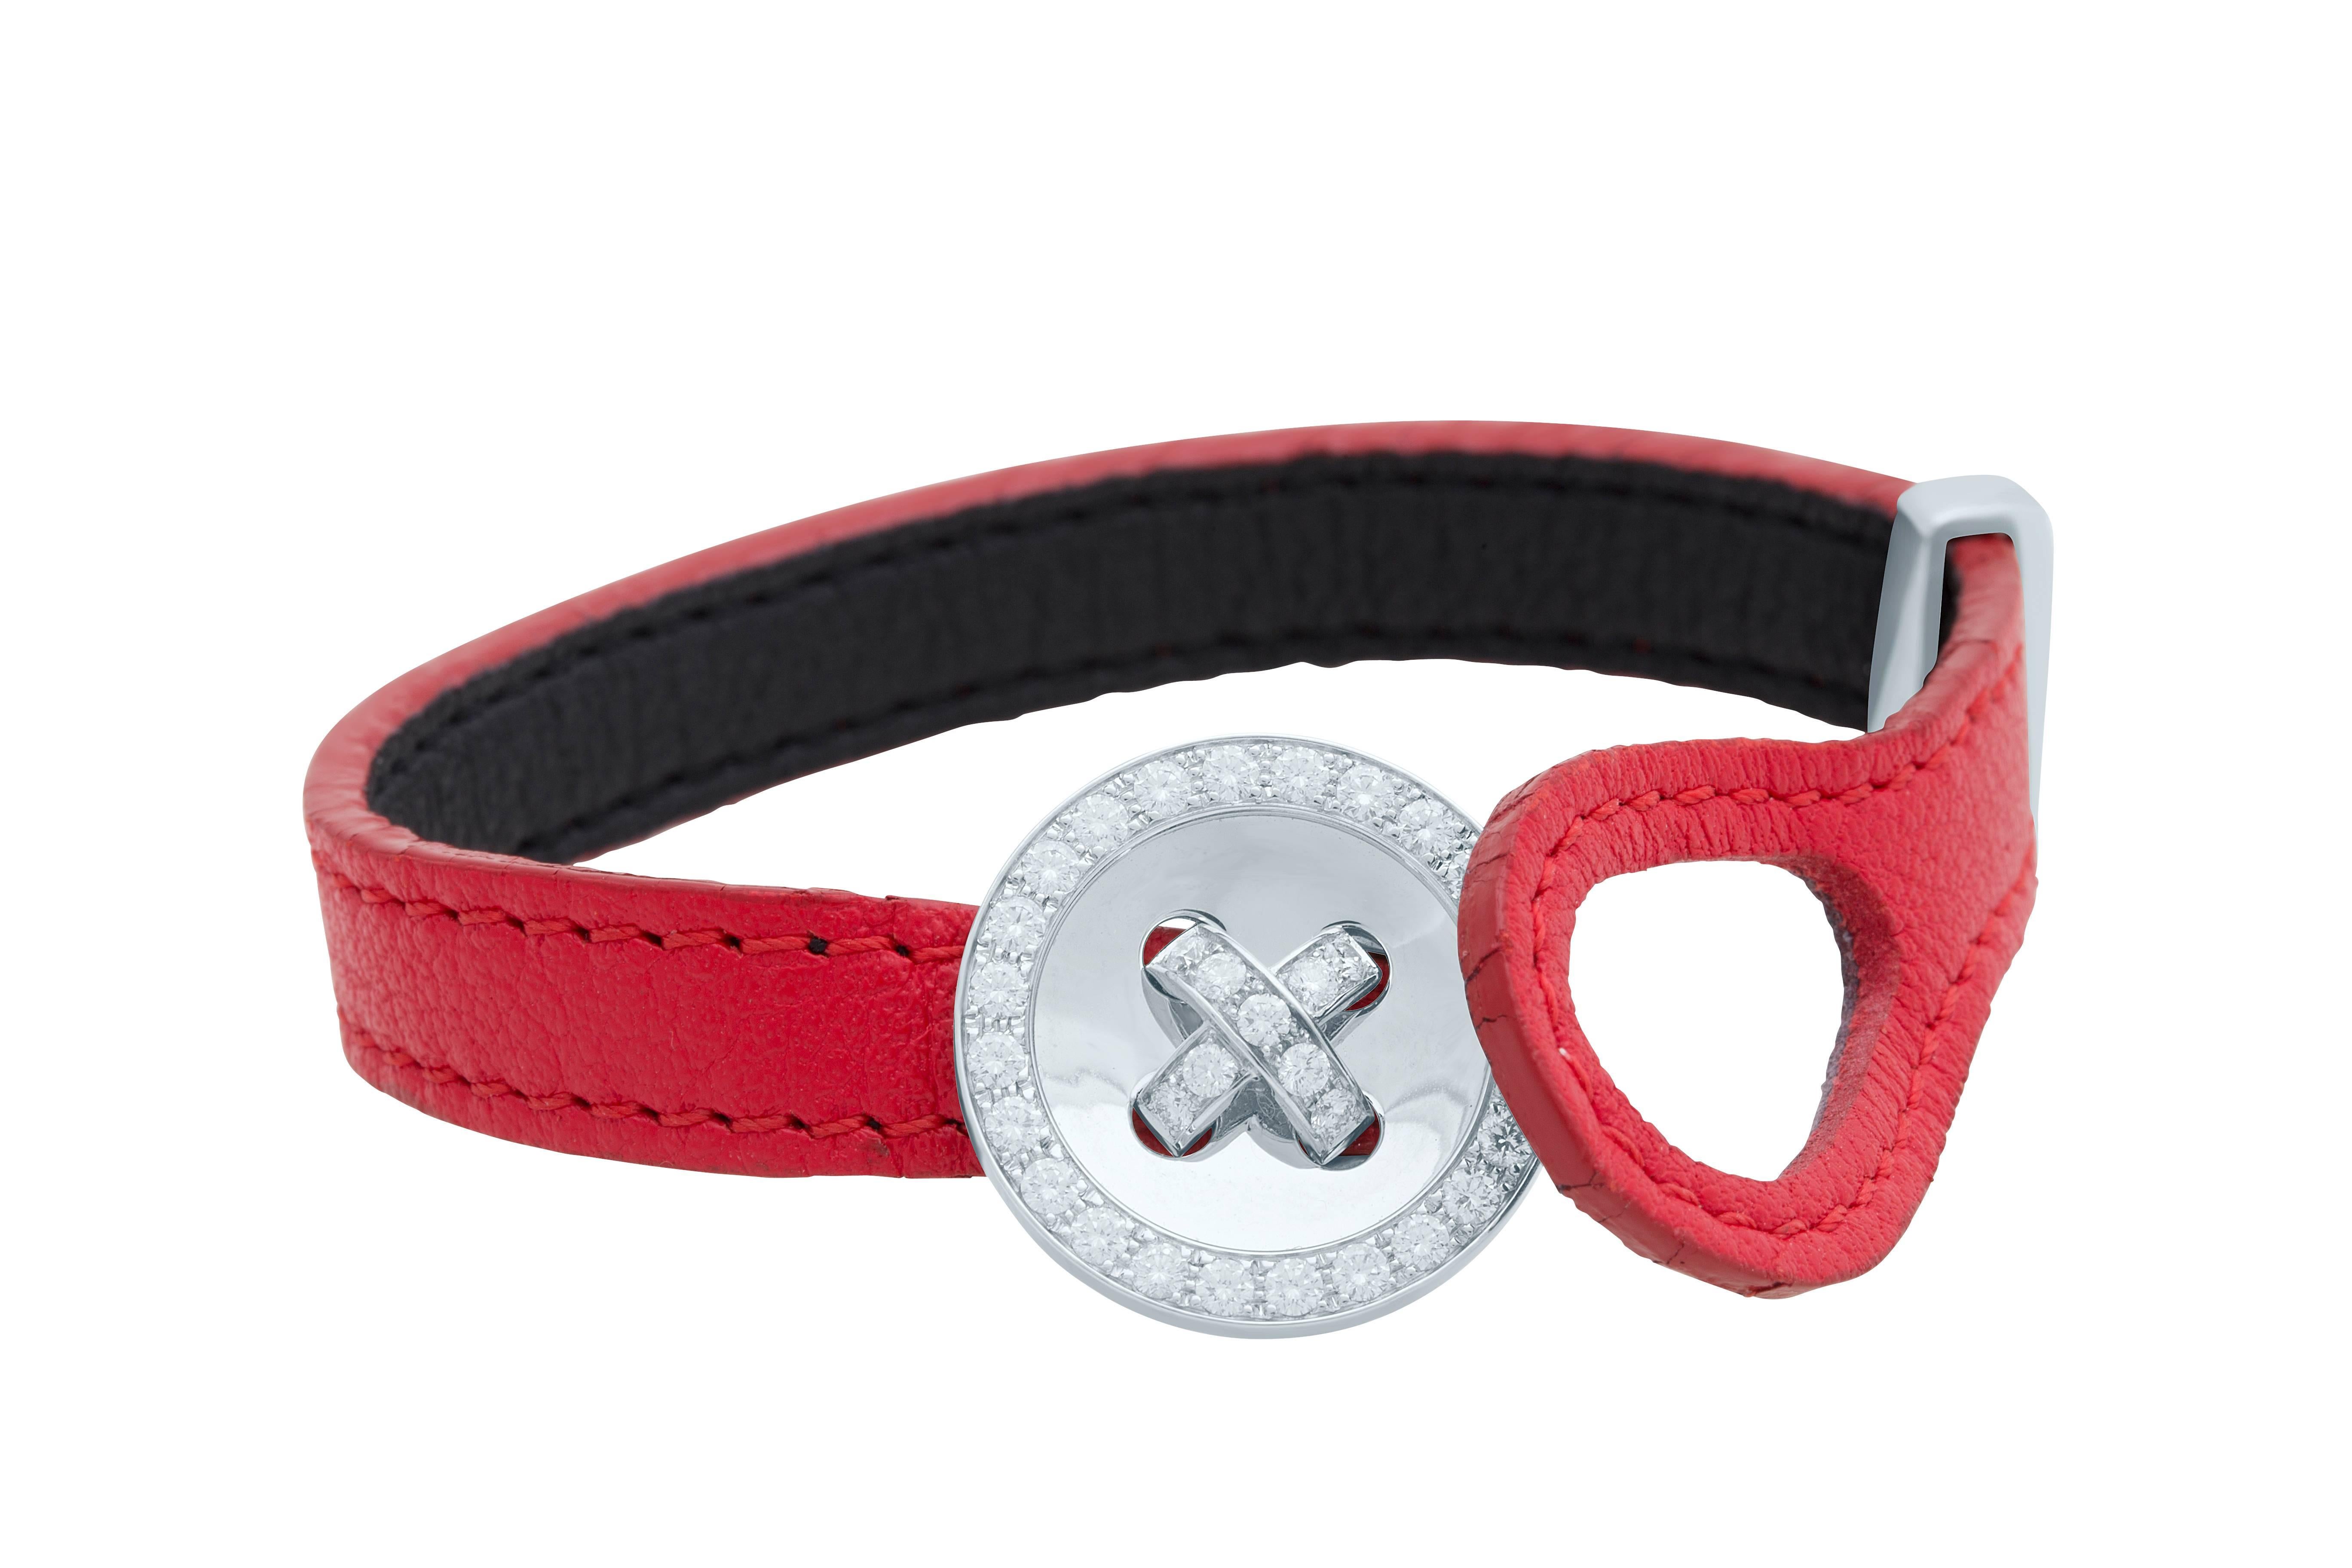 Van Cleef & Arpels Diamond Button Leather Bracelet, 18K White Gold, Red Leather Strap, Button Diameter: 0.81 inch /  2.06 cm, Length: 7.00 in /  17.78 cm, Width: 0.375 in /  0.95 cm, Hallmarks: "VCA, 750, BL, 125551, Makers Mark, French